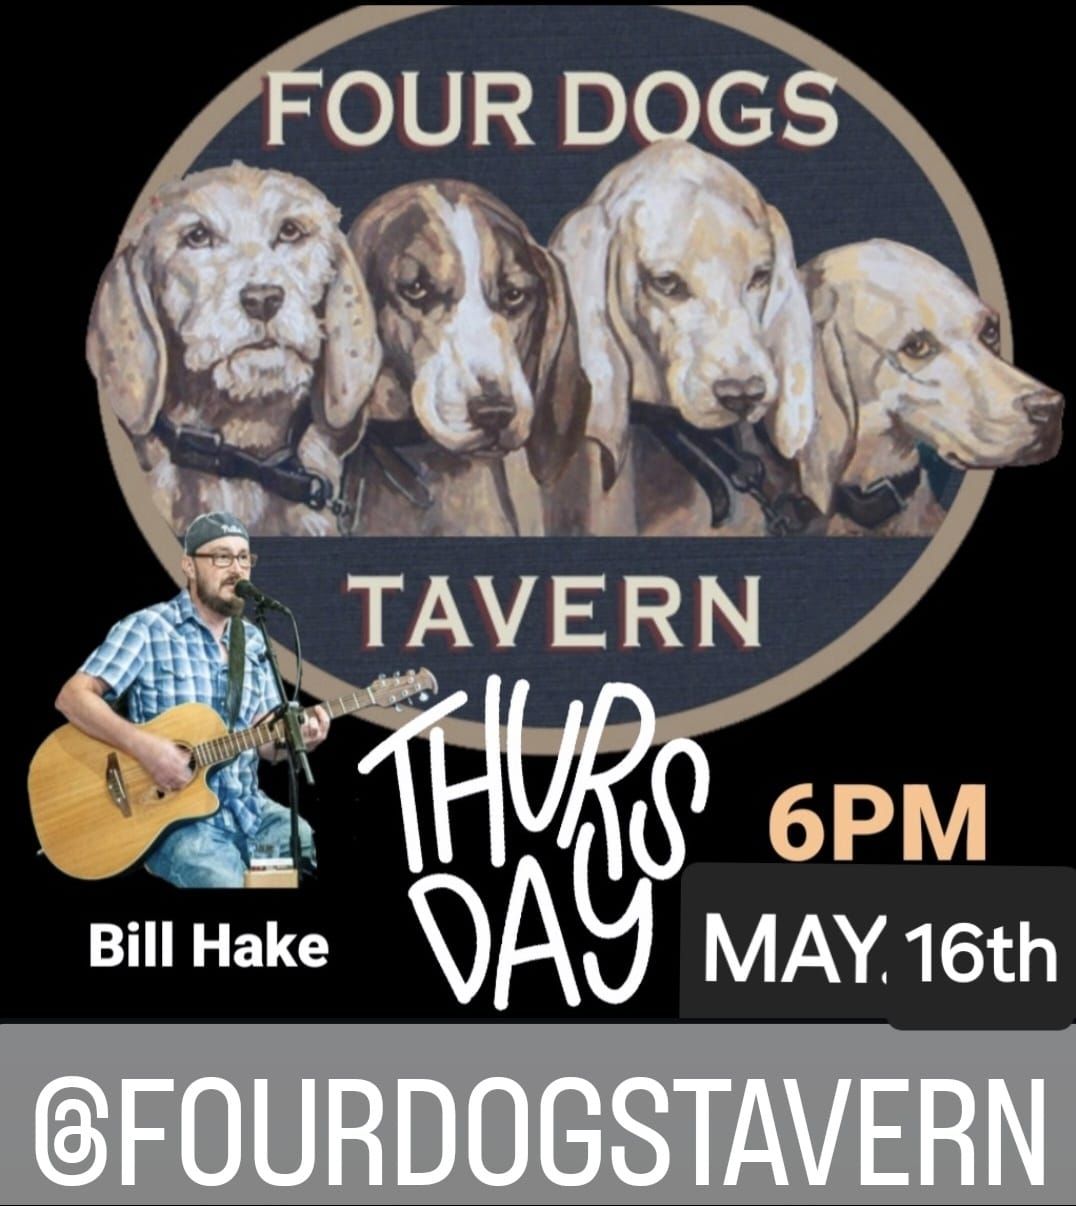 Bill Hake at Four Dogs THURSDAY 